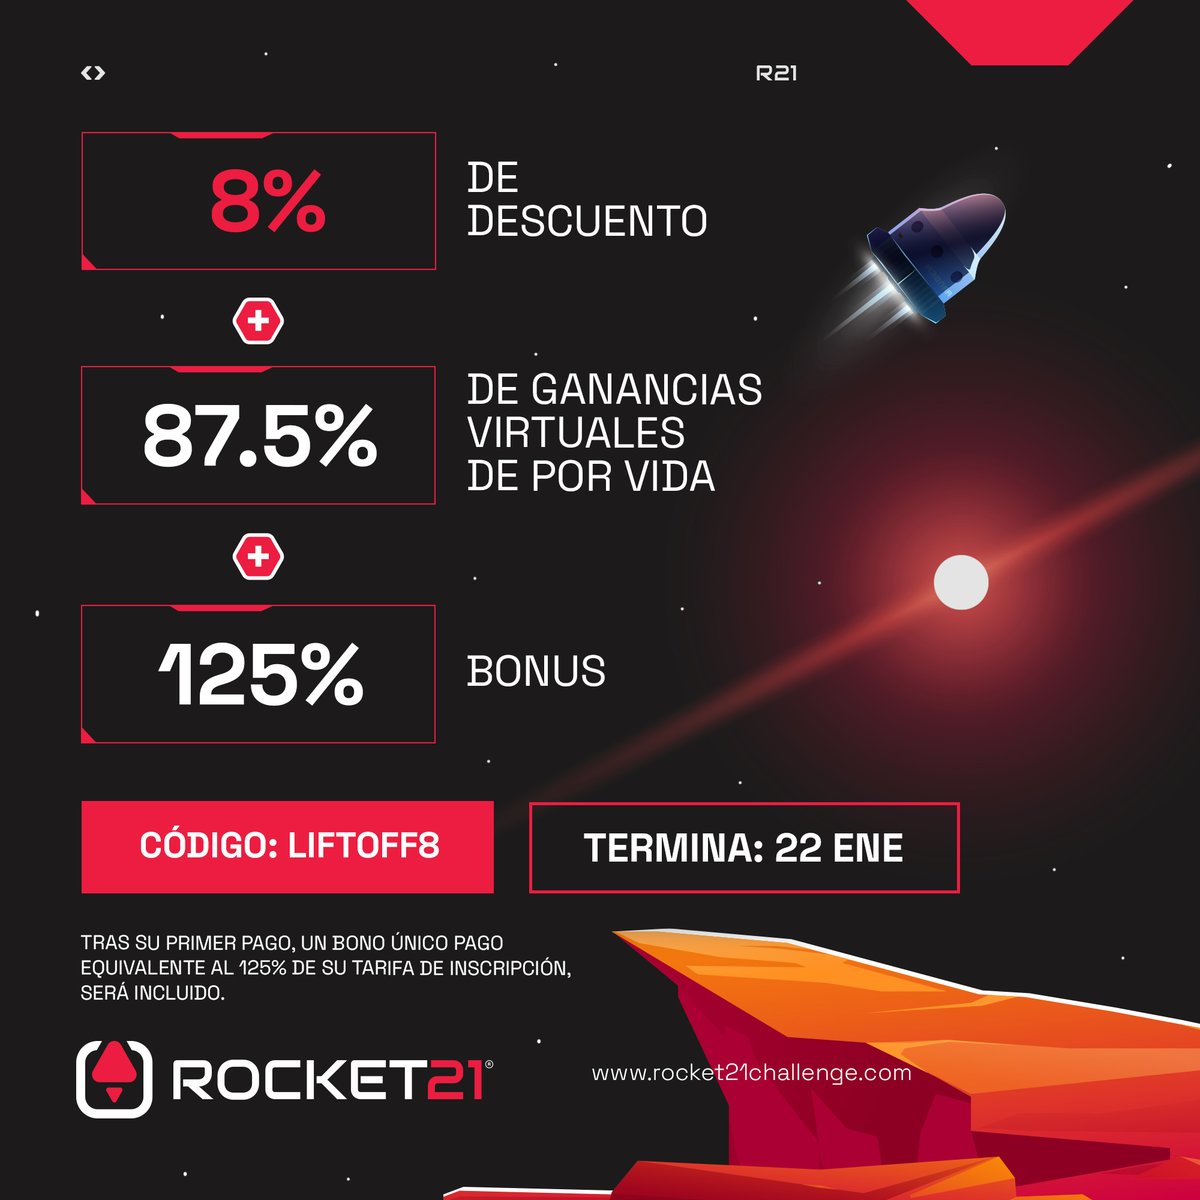 🔥Embark on a cosmic journey with Liftoff8!  🚀Get an 8% discount + 87.5% lifetime virtual profits + 125% bonus with code Liftoff8. Join by January 22nd for financial prosperity in the cosmos. Ready for success? ✨Register:
dashboard.rocket21challenge.com/purchasechalle… #StellarVenture #CosmicAdventure